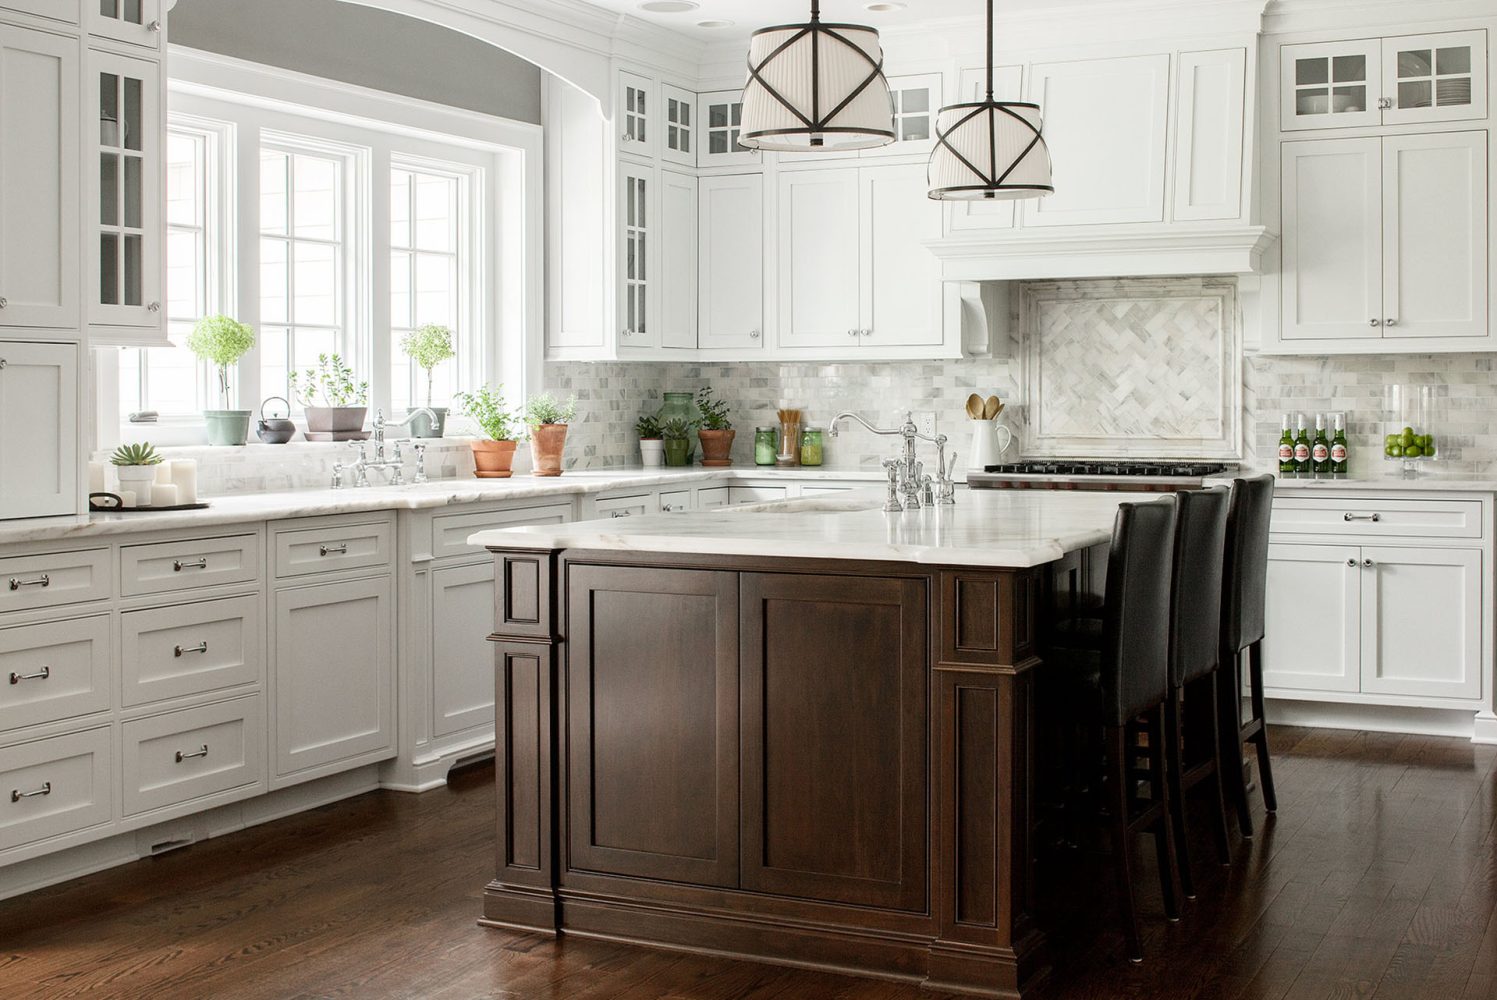 Kitchen with white cabinetry, white marble tile, and a dark brown island with white countertop and sink inset. Pendant lights are white shades with decorative metal overlay.